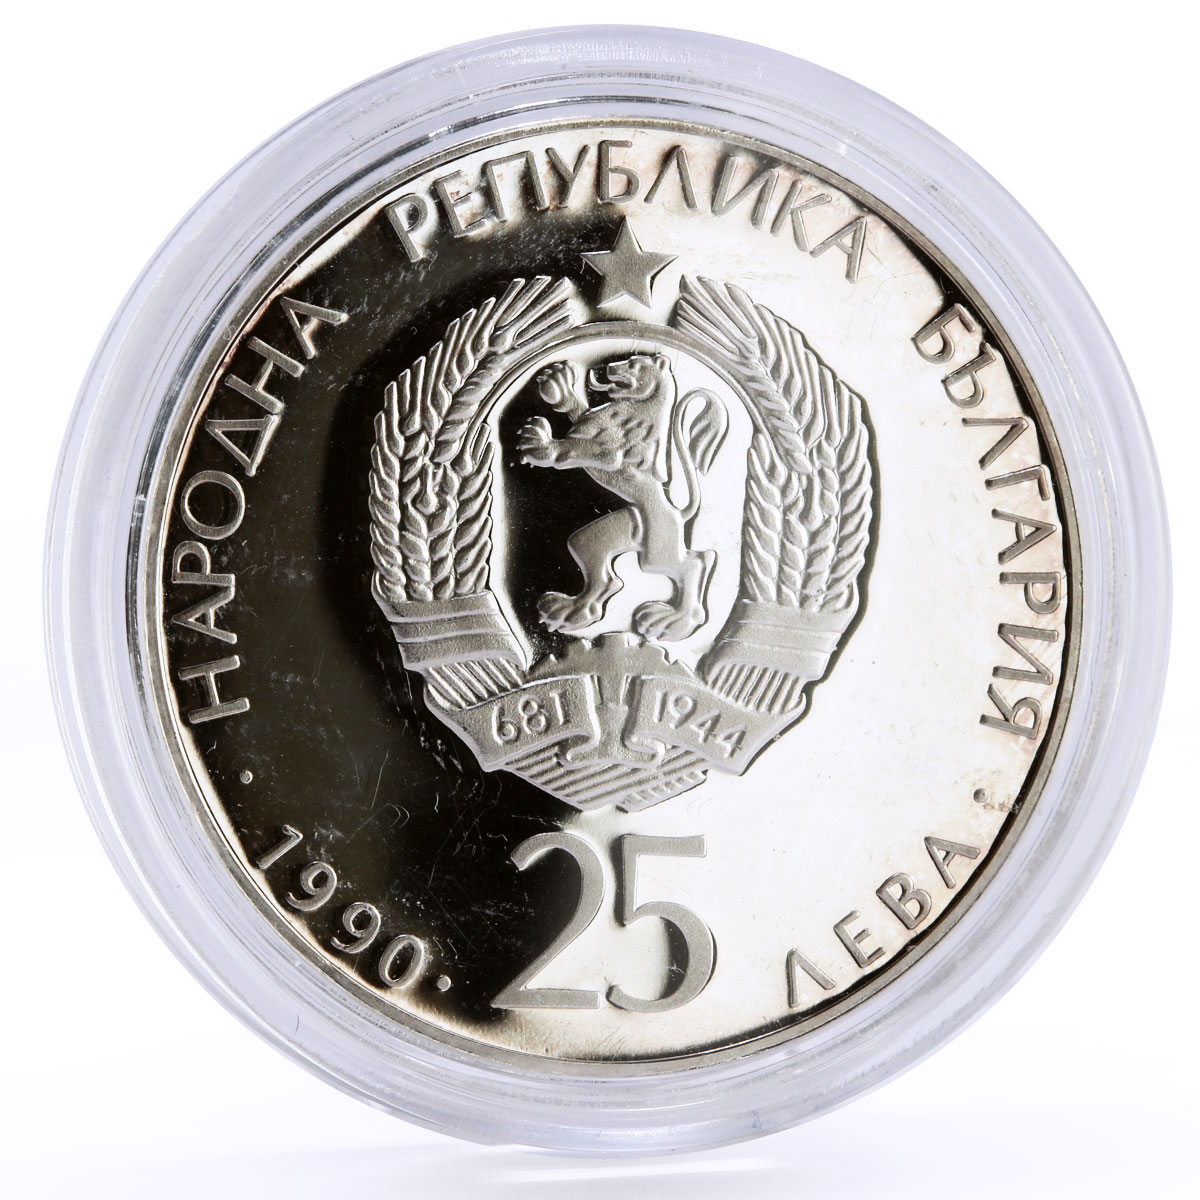 Bulgaria 25 leva Football World Cup in Italy proof silver coin 1990